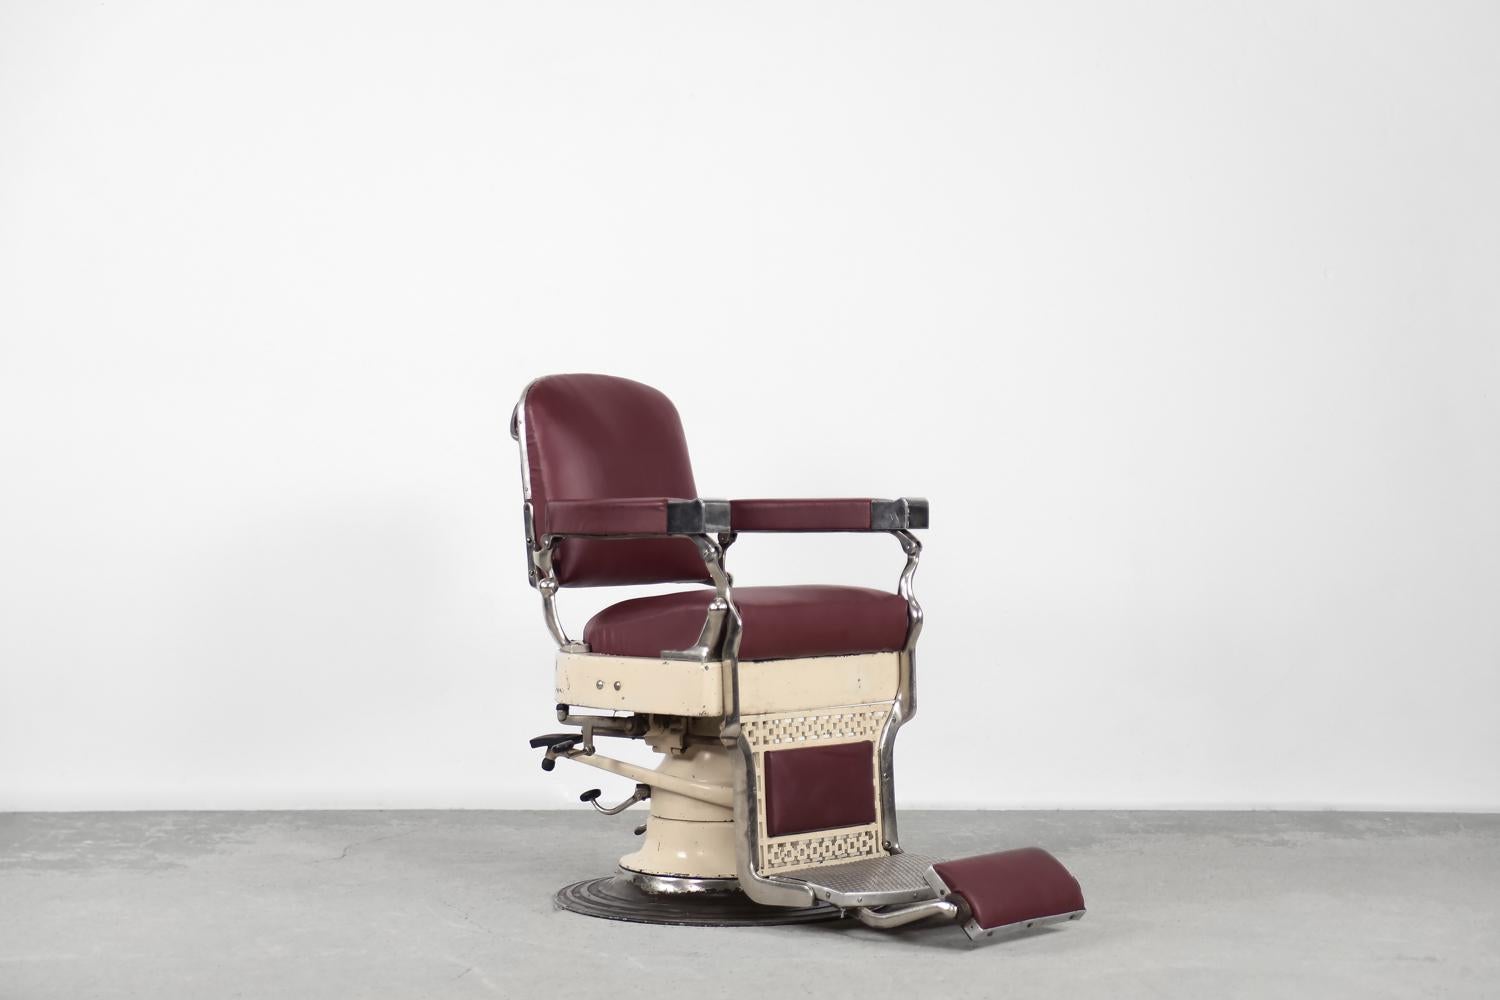 This antique dental chair was produced in Denmark at the turn of the 1920s and 1930s. It is marked with the Axel Christensen Aarhus signature. The seat is swiveling and is raised with a double clutch and lowered with an oil level control. It uses